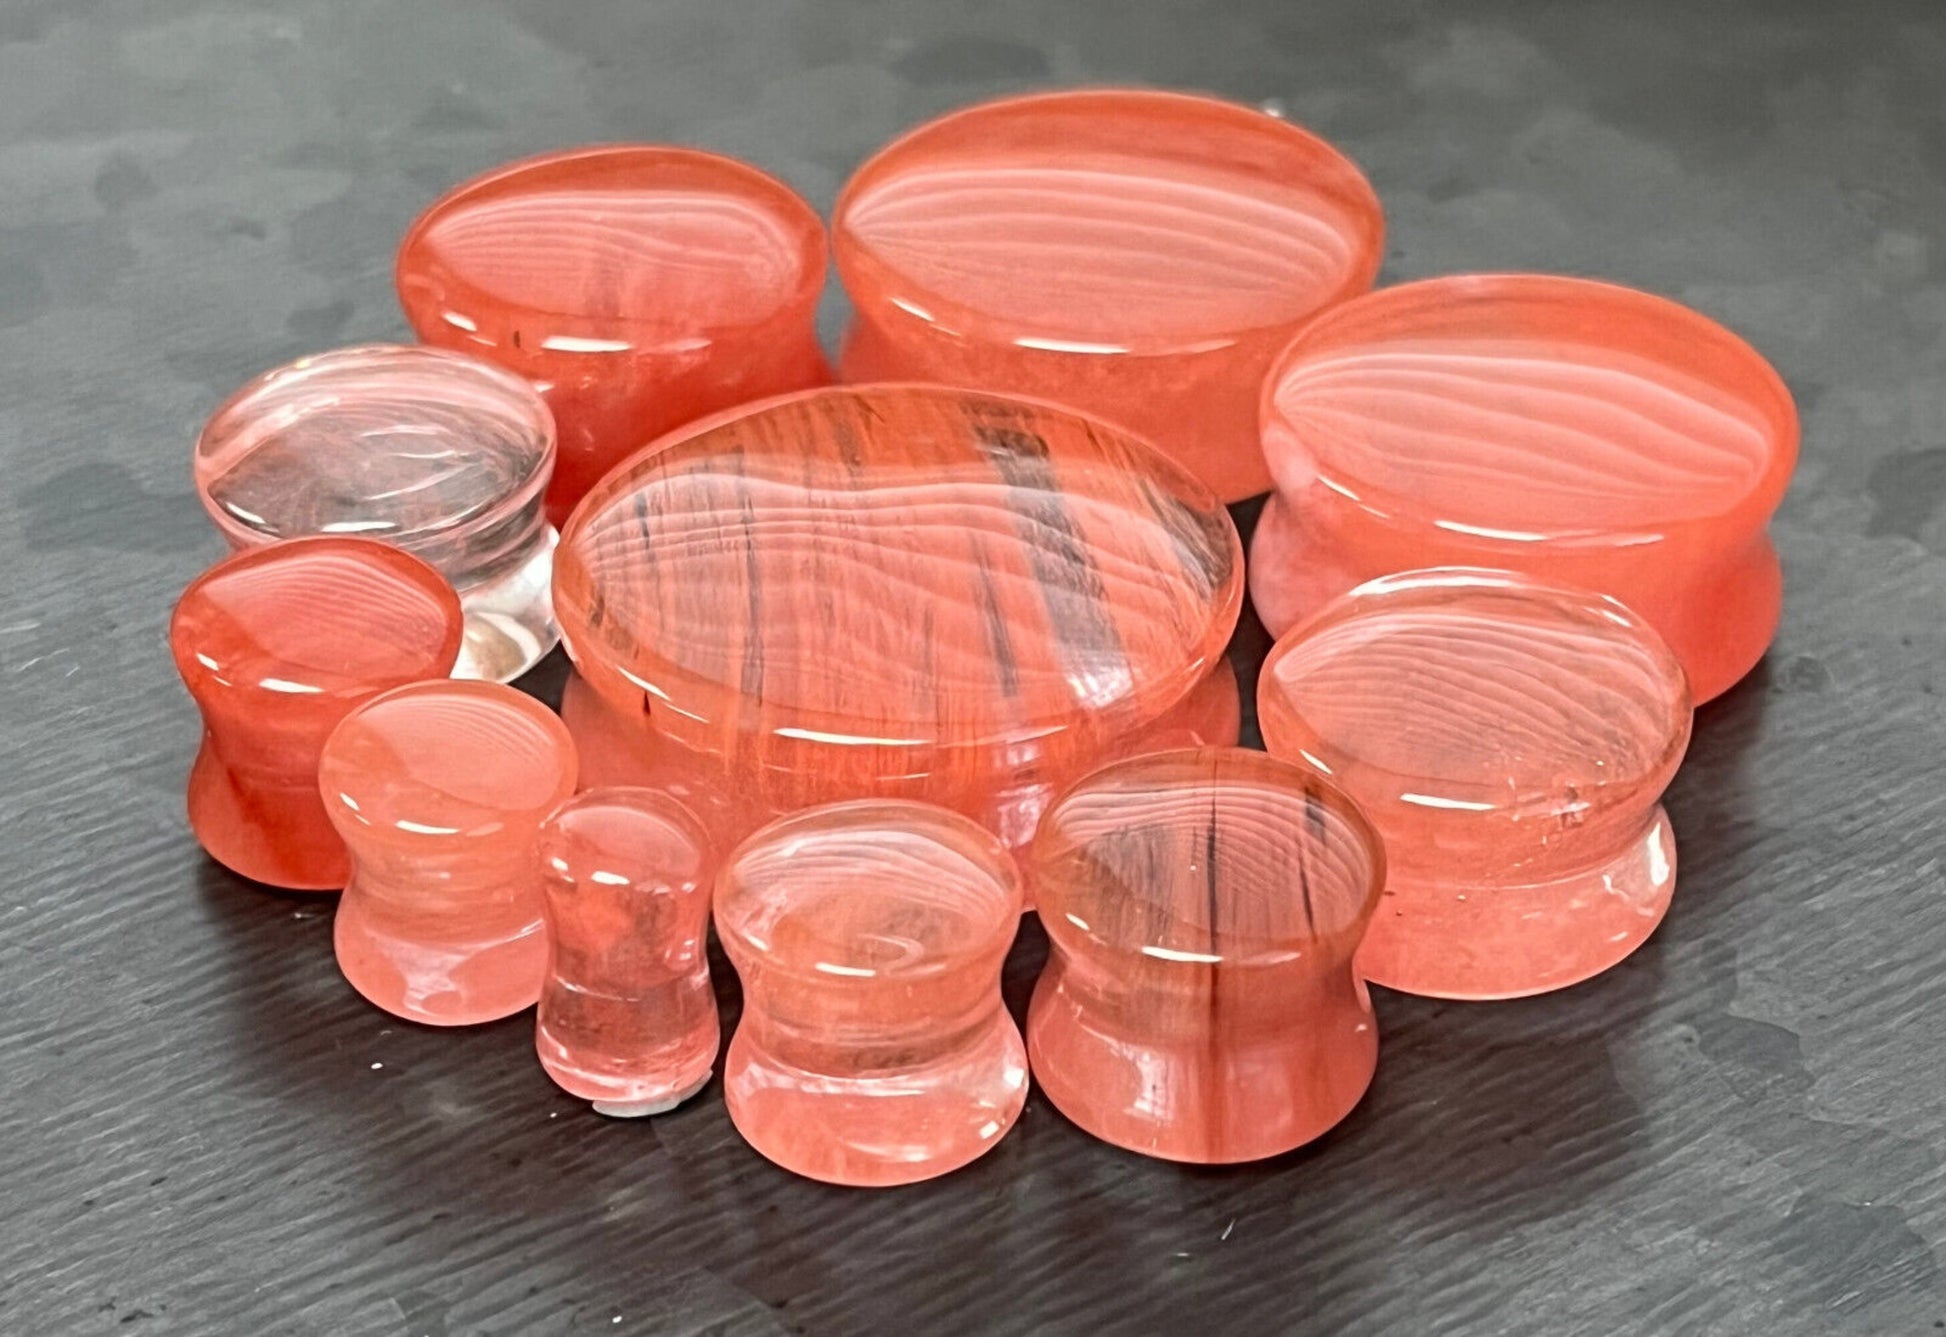 PAIR of Stunning Fresh Coral Style Double Flare Glass Plugs - Gauge 2g (6mm) thru 1&1/8" (28mm) Available!